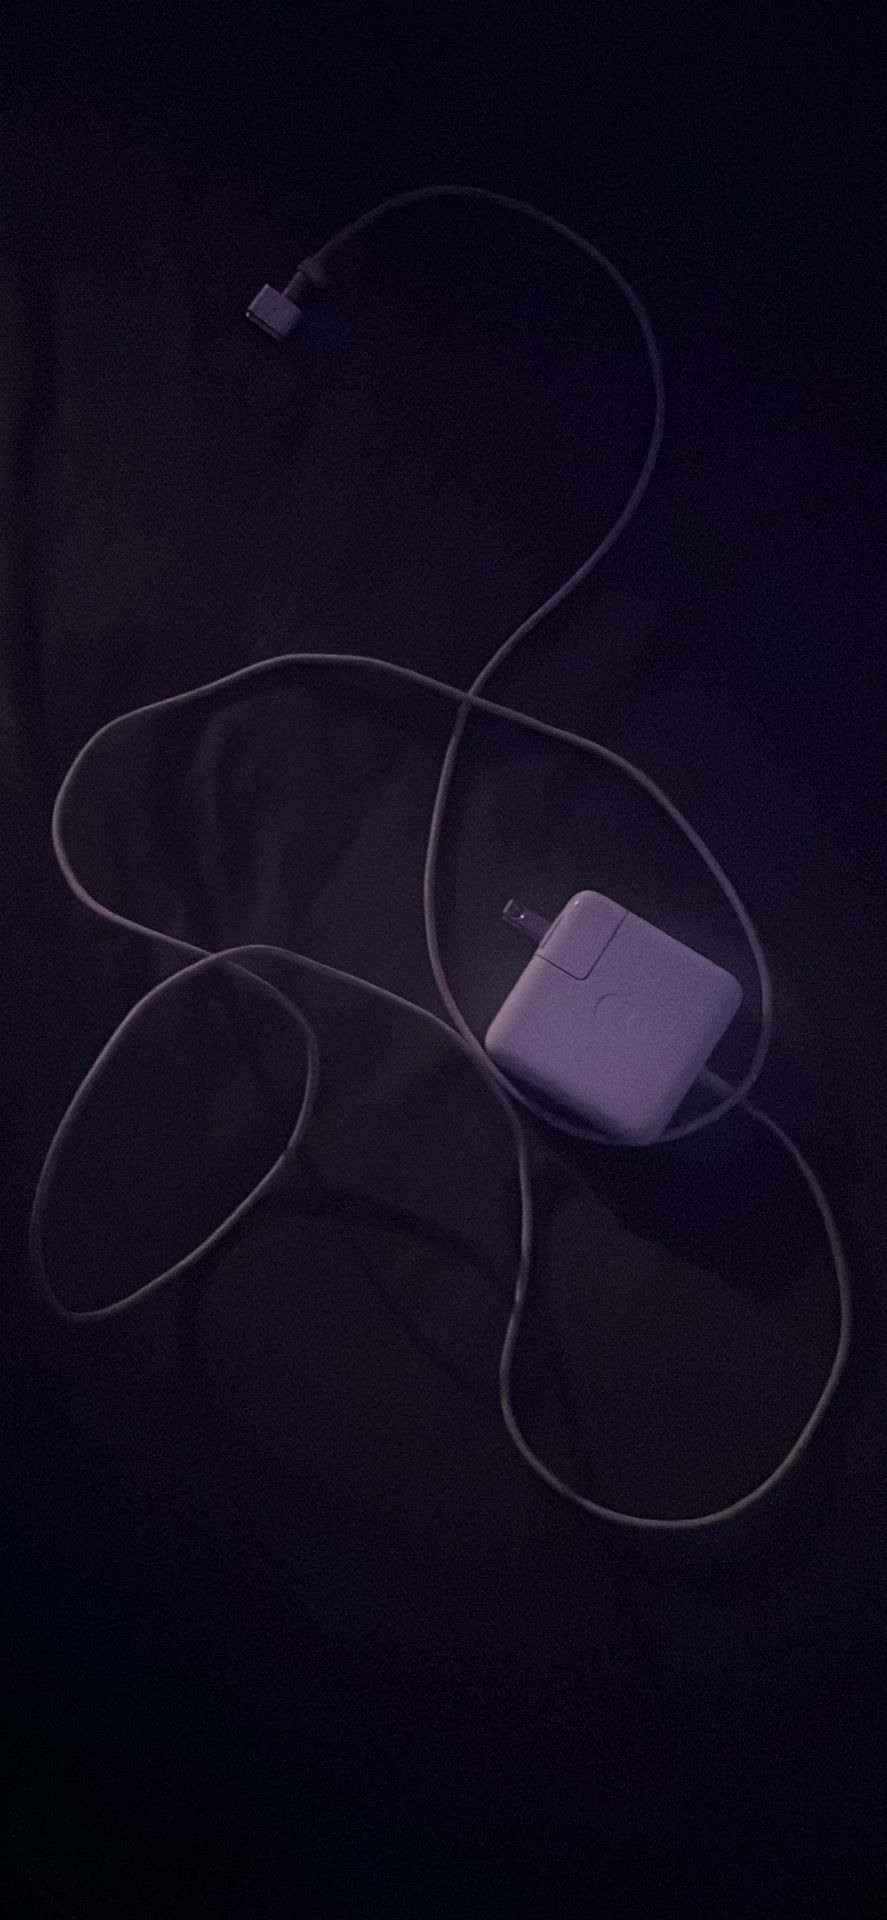 Apple MacBook charger 